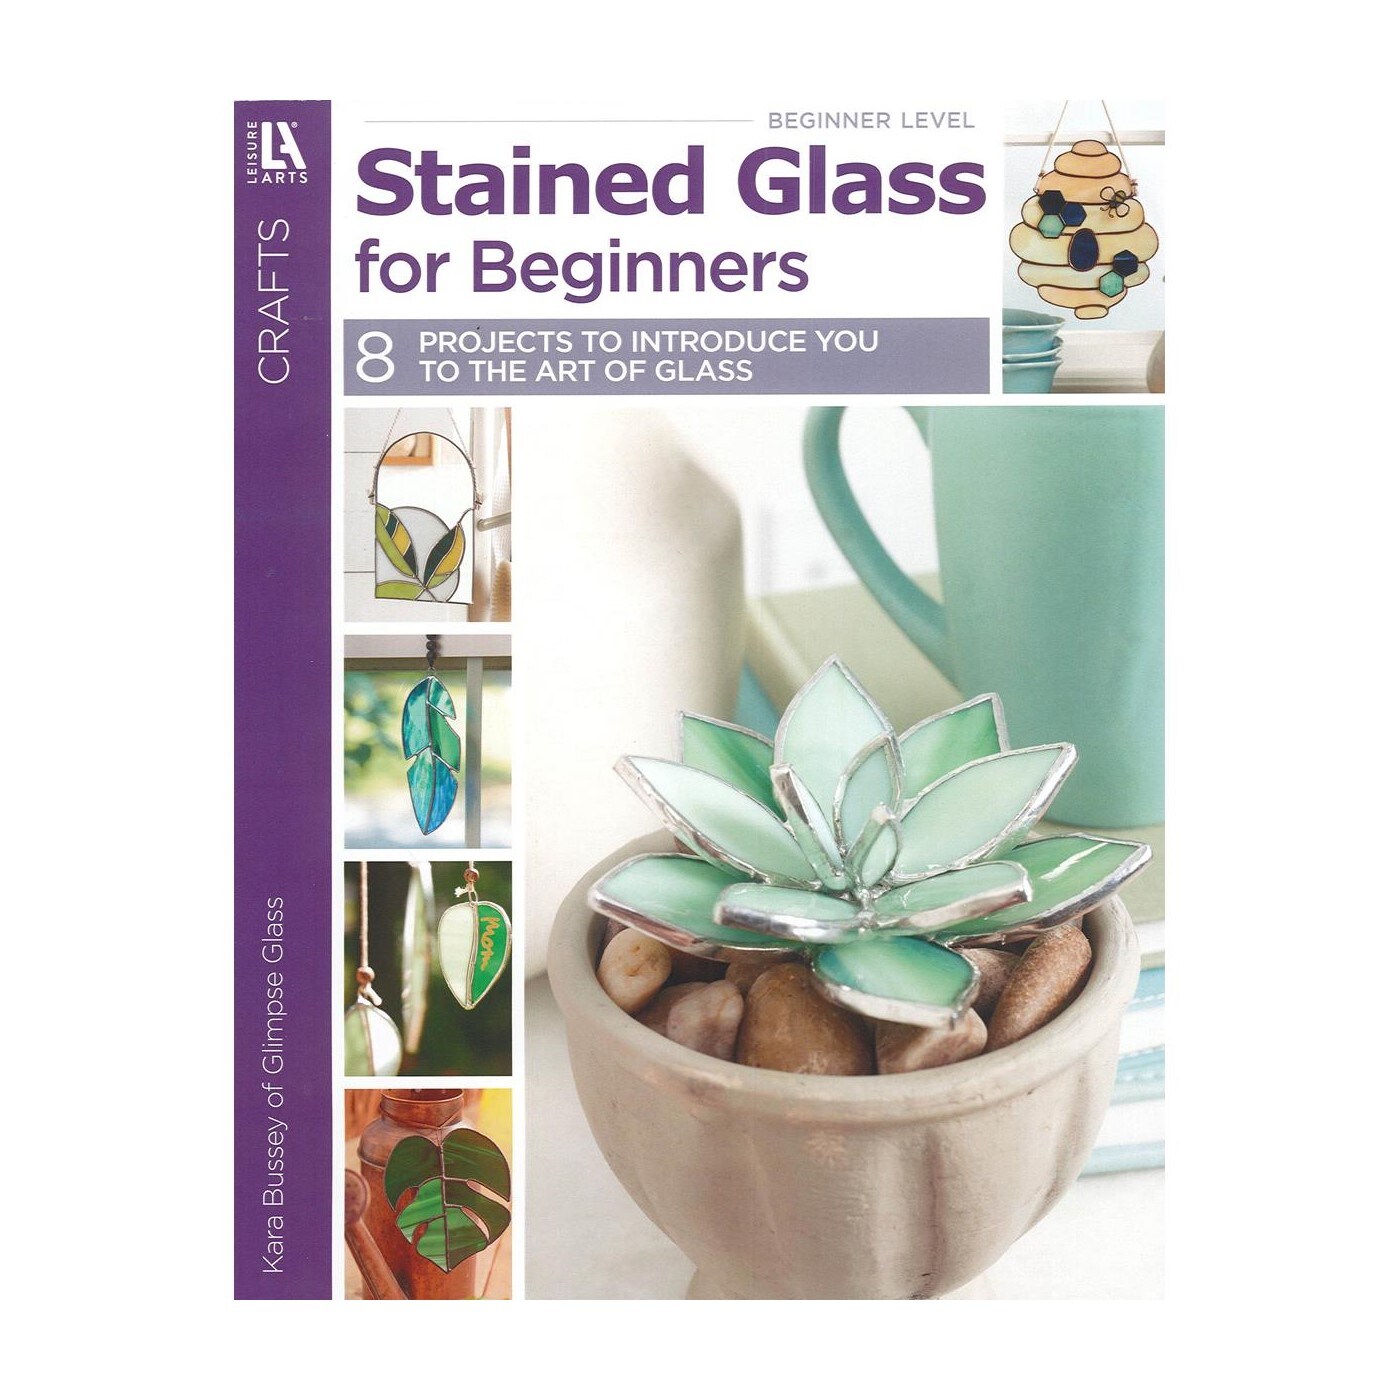 Leisure Arts Stained Glass For Beginniers Crafting Book